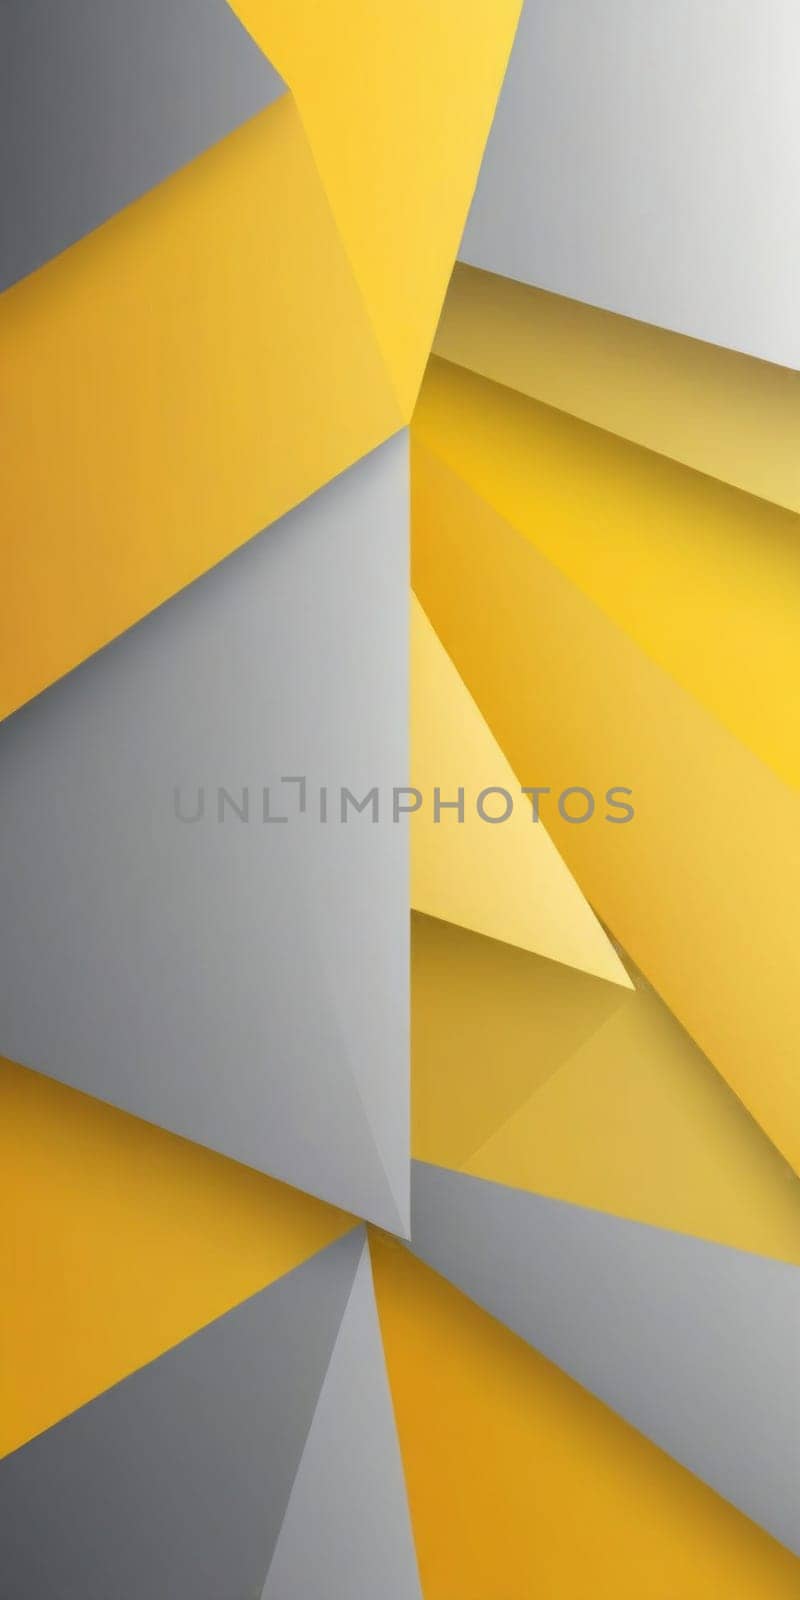 Geometric Shapes in Yellow Lightgrey by nkotlyar